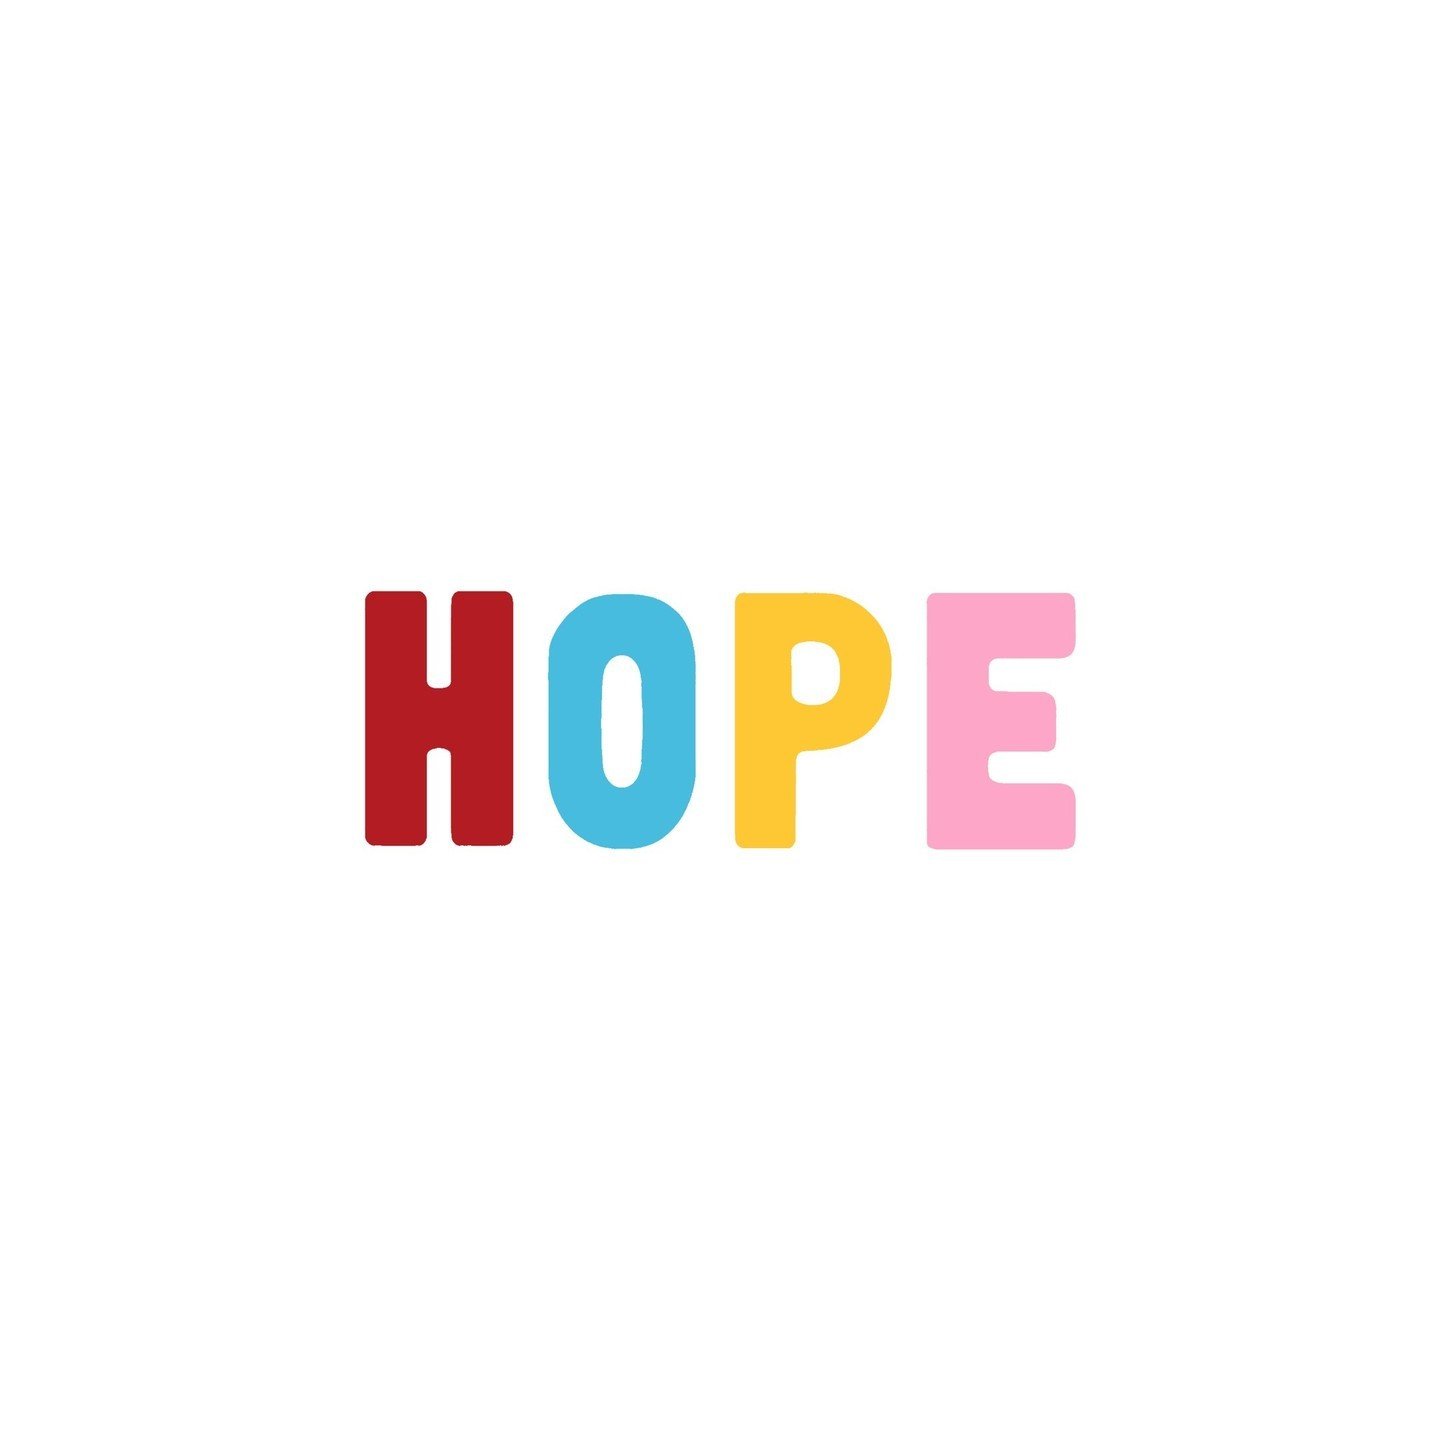 Hope - a feeling of expectation and desire for a certain thing to happen.⁠
⁠
What do you desire? ⁠
⁠
I just hope that things will get better for us and that the girls get the best life that they deserve.⁠
⁠
⁠
#hope #love #joy #peace #longsuffering #p